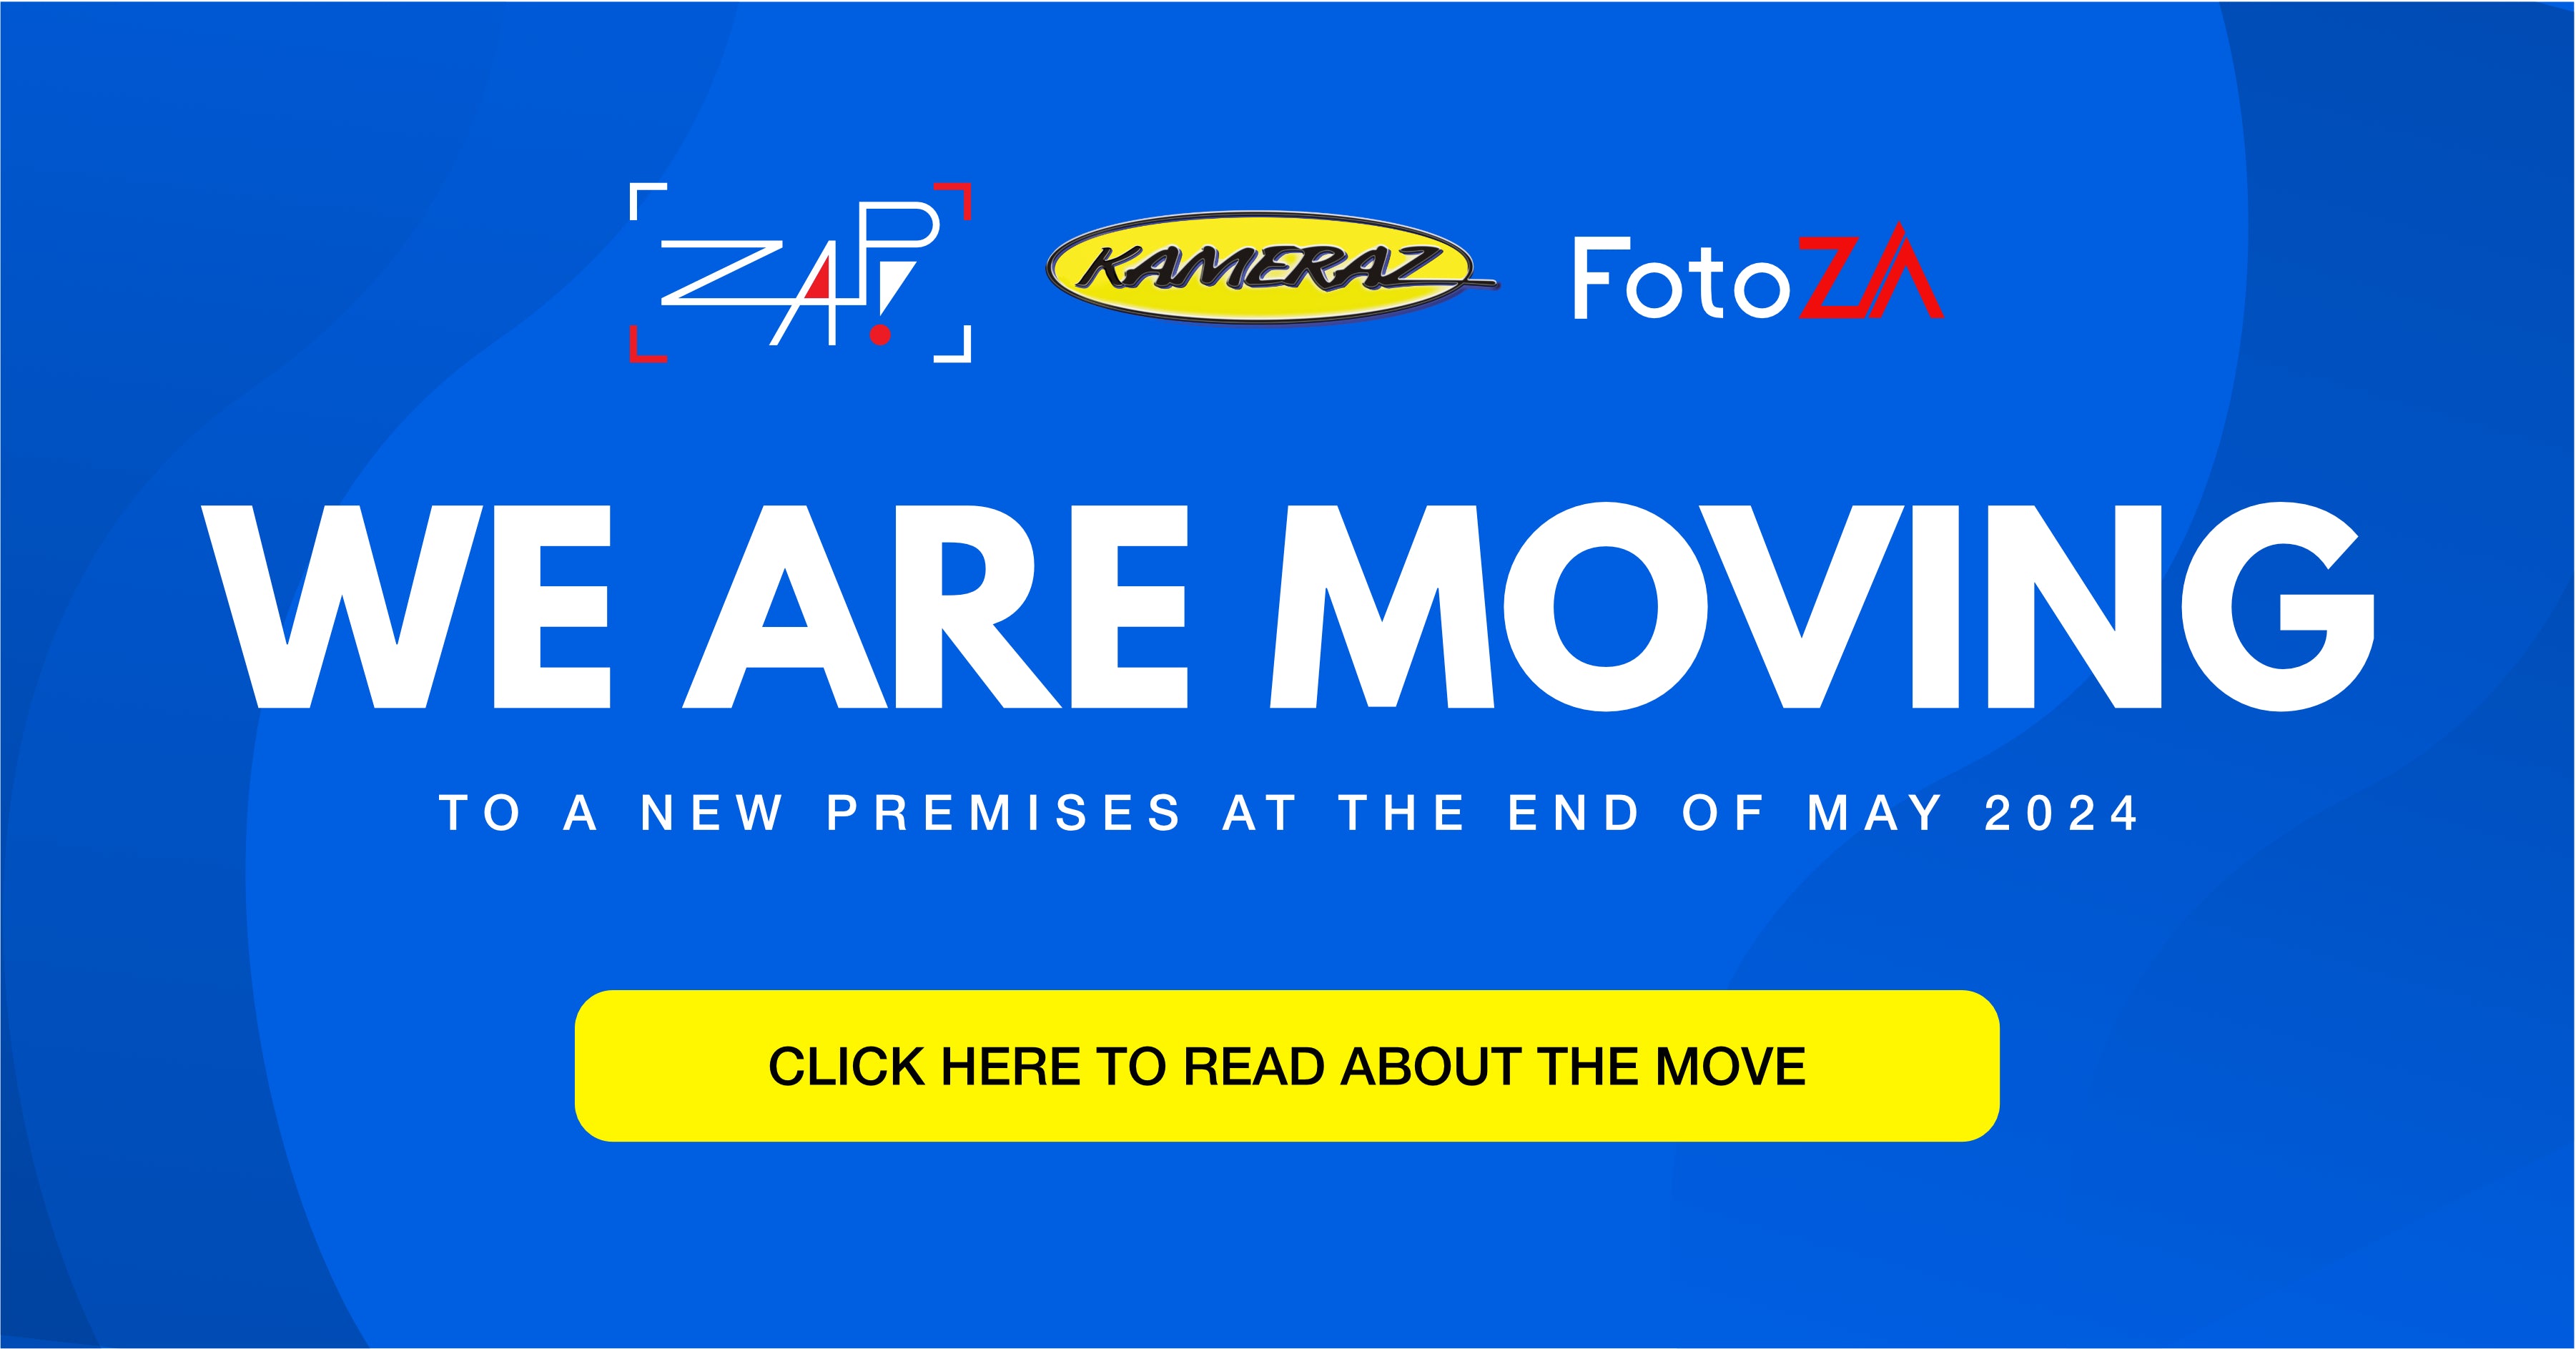 We are moving to a new home | KAMERAZ, FotoZA & ZAP!